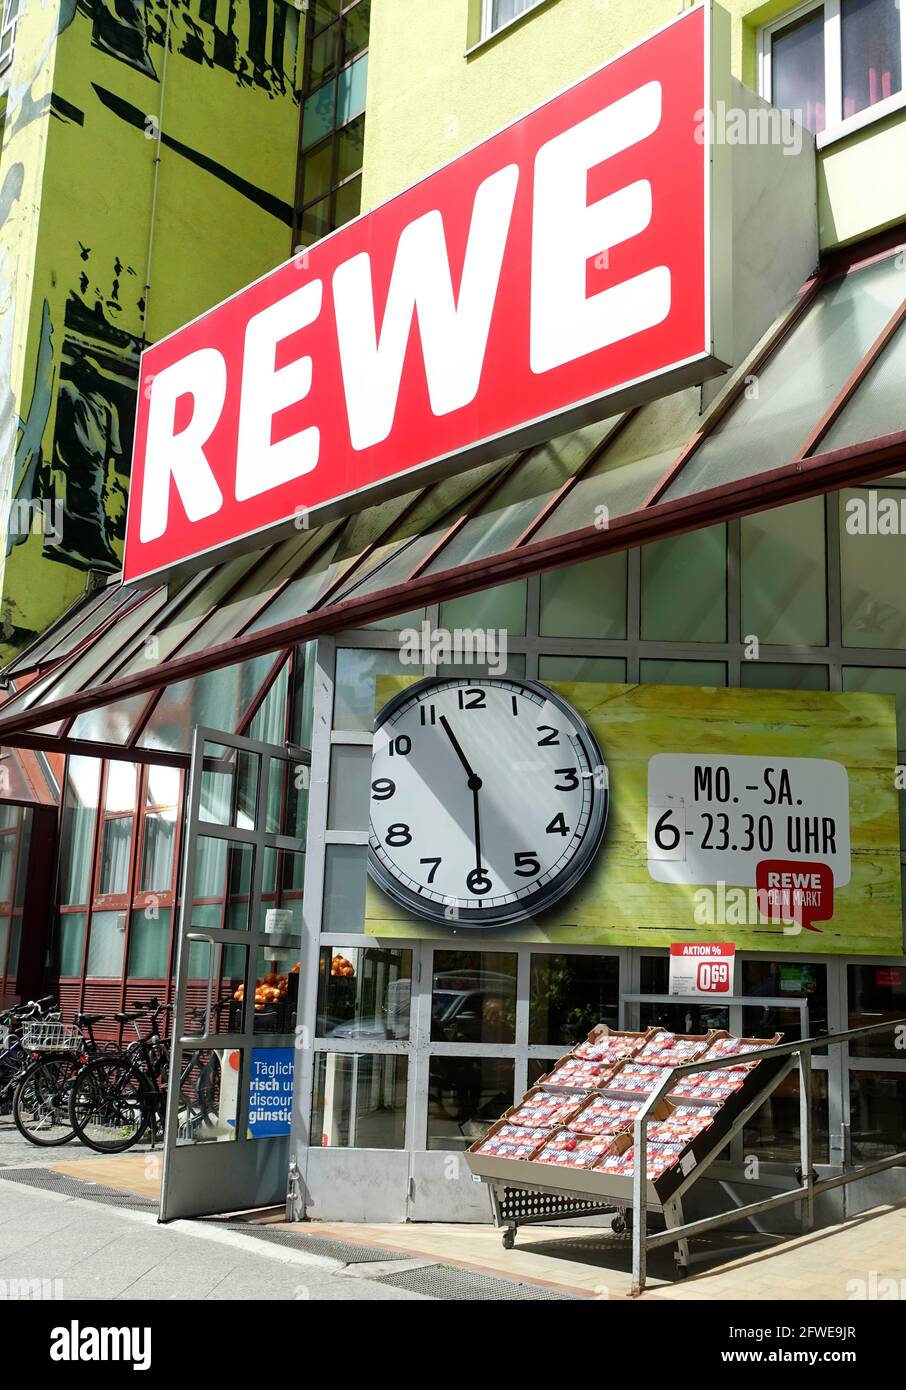 Page 8 - Rewe High Resolution Stock Photography and Images - Alamy